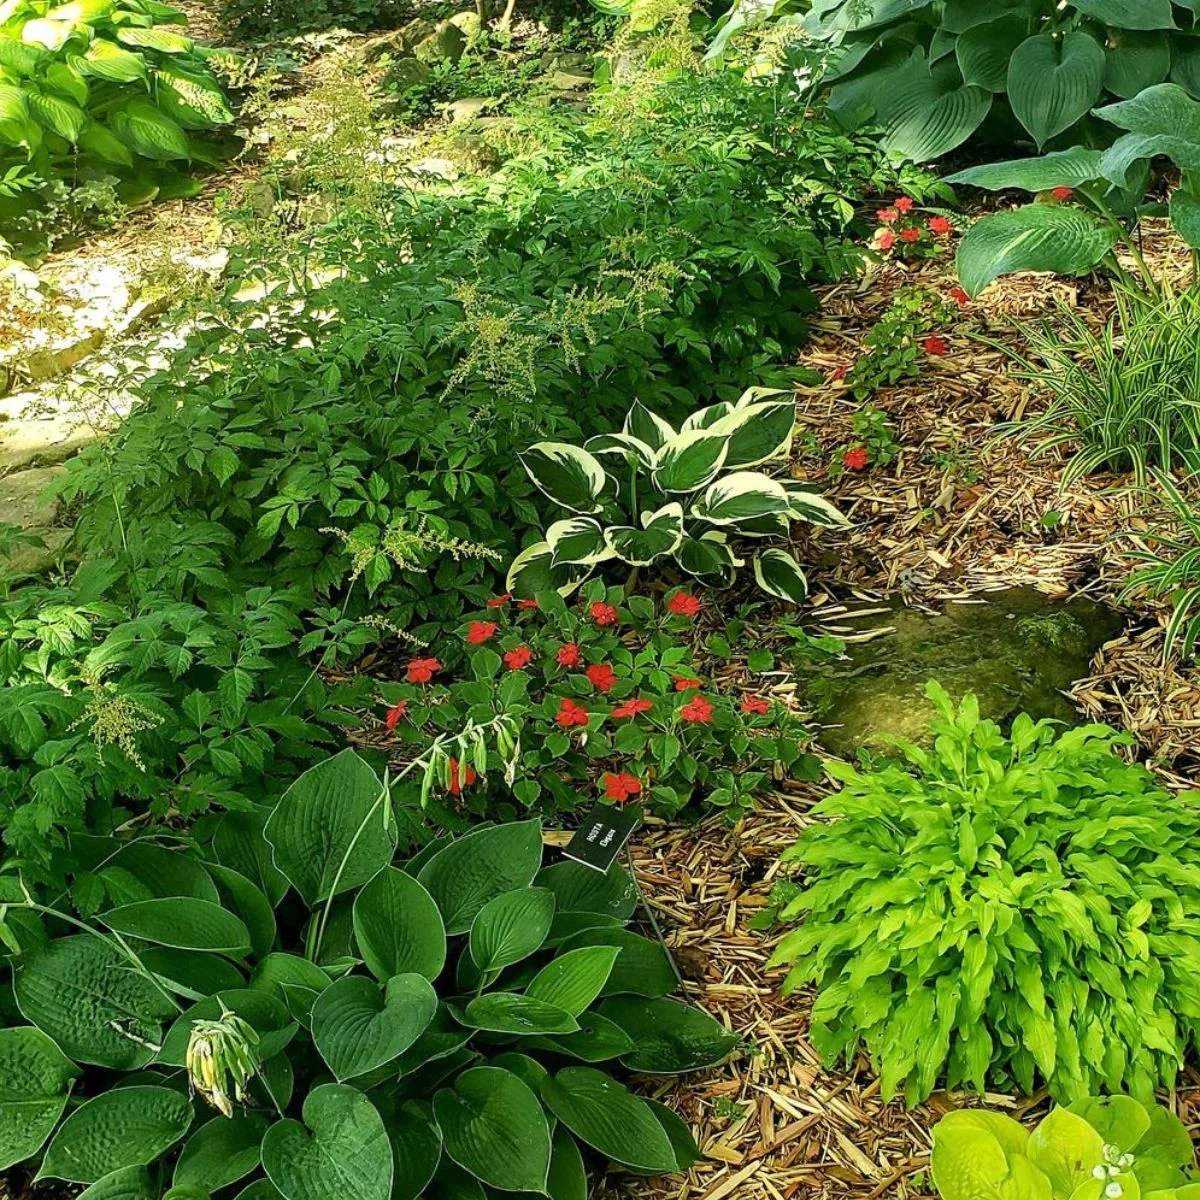 there are plenty of colors and textures in this shade garden